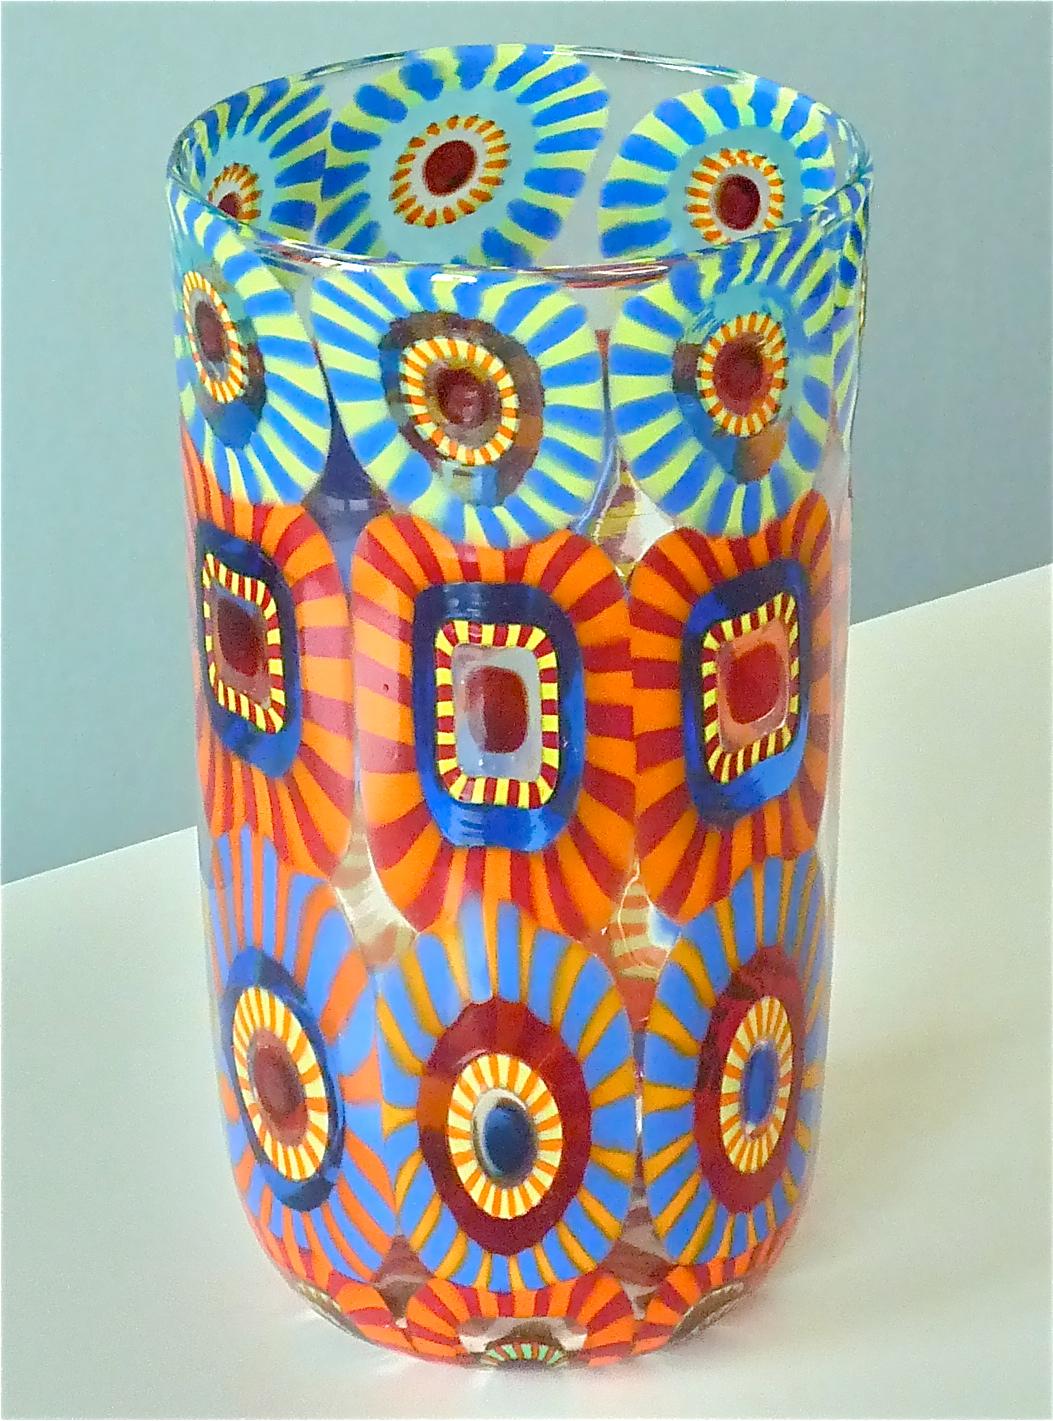 A large and colorful handcrafted Murano Murine art glass vase by Eli Vetri Dárte di Formentello from Murano Italy, 21th Century. The quality of the art glass vase is comparable to Venini and Barovier & Toso. An amazing composition of large colorful